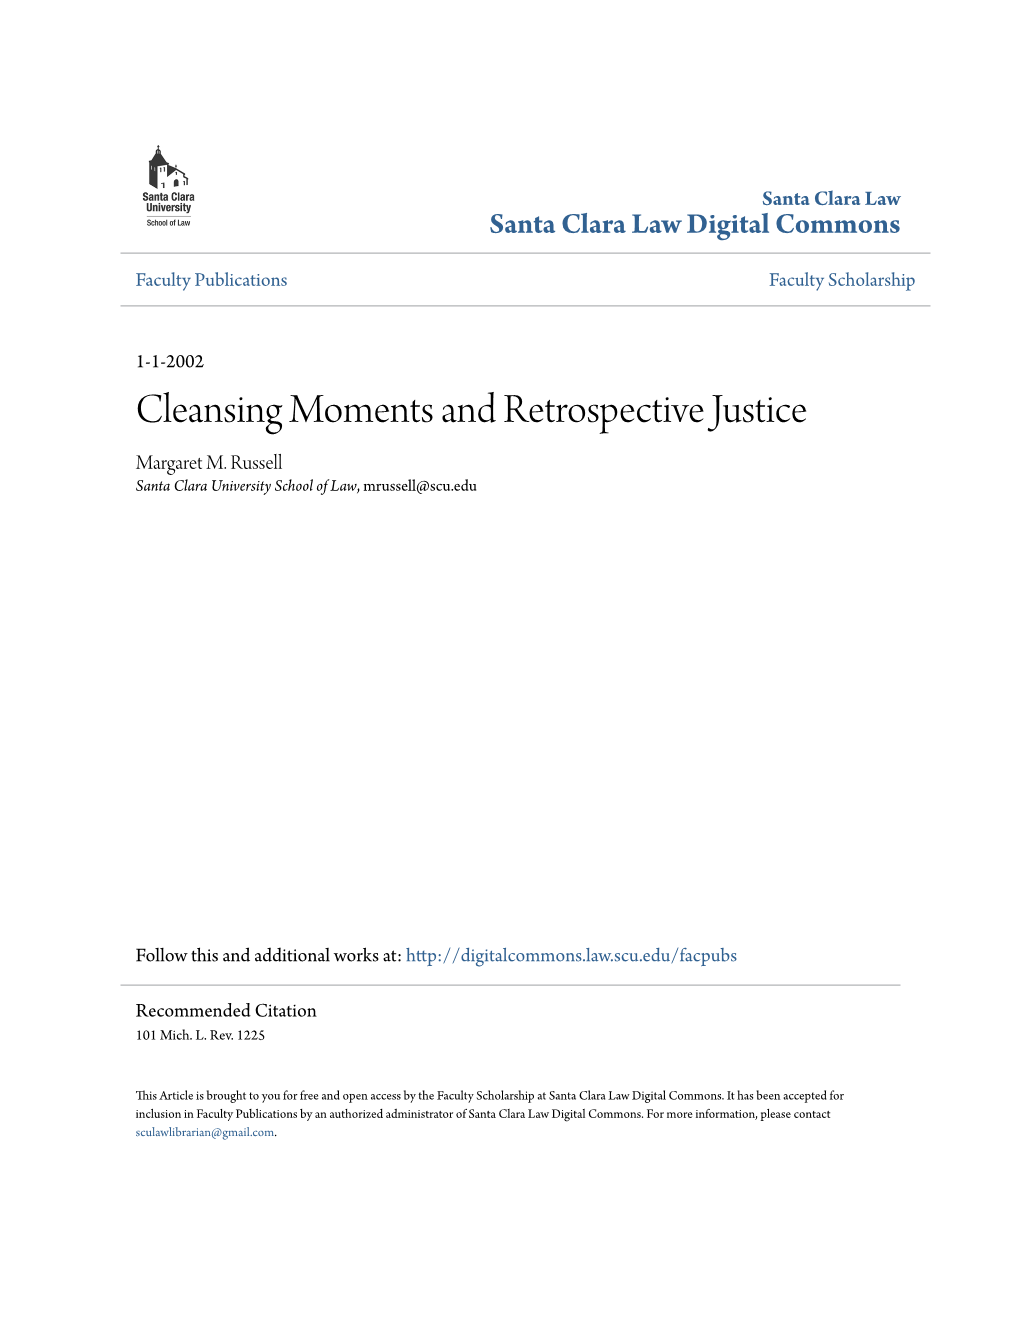 Cleansing Moments and Retrospective Justice Margaret M